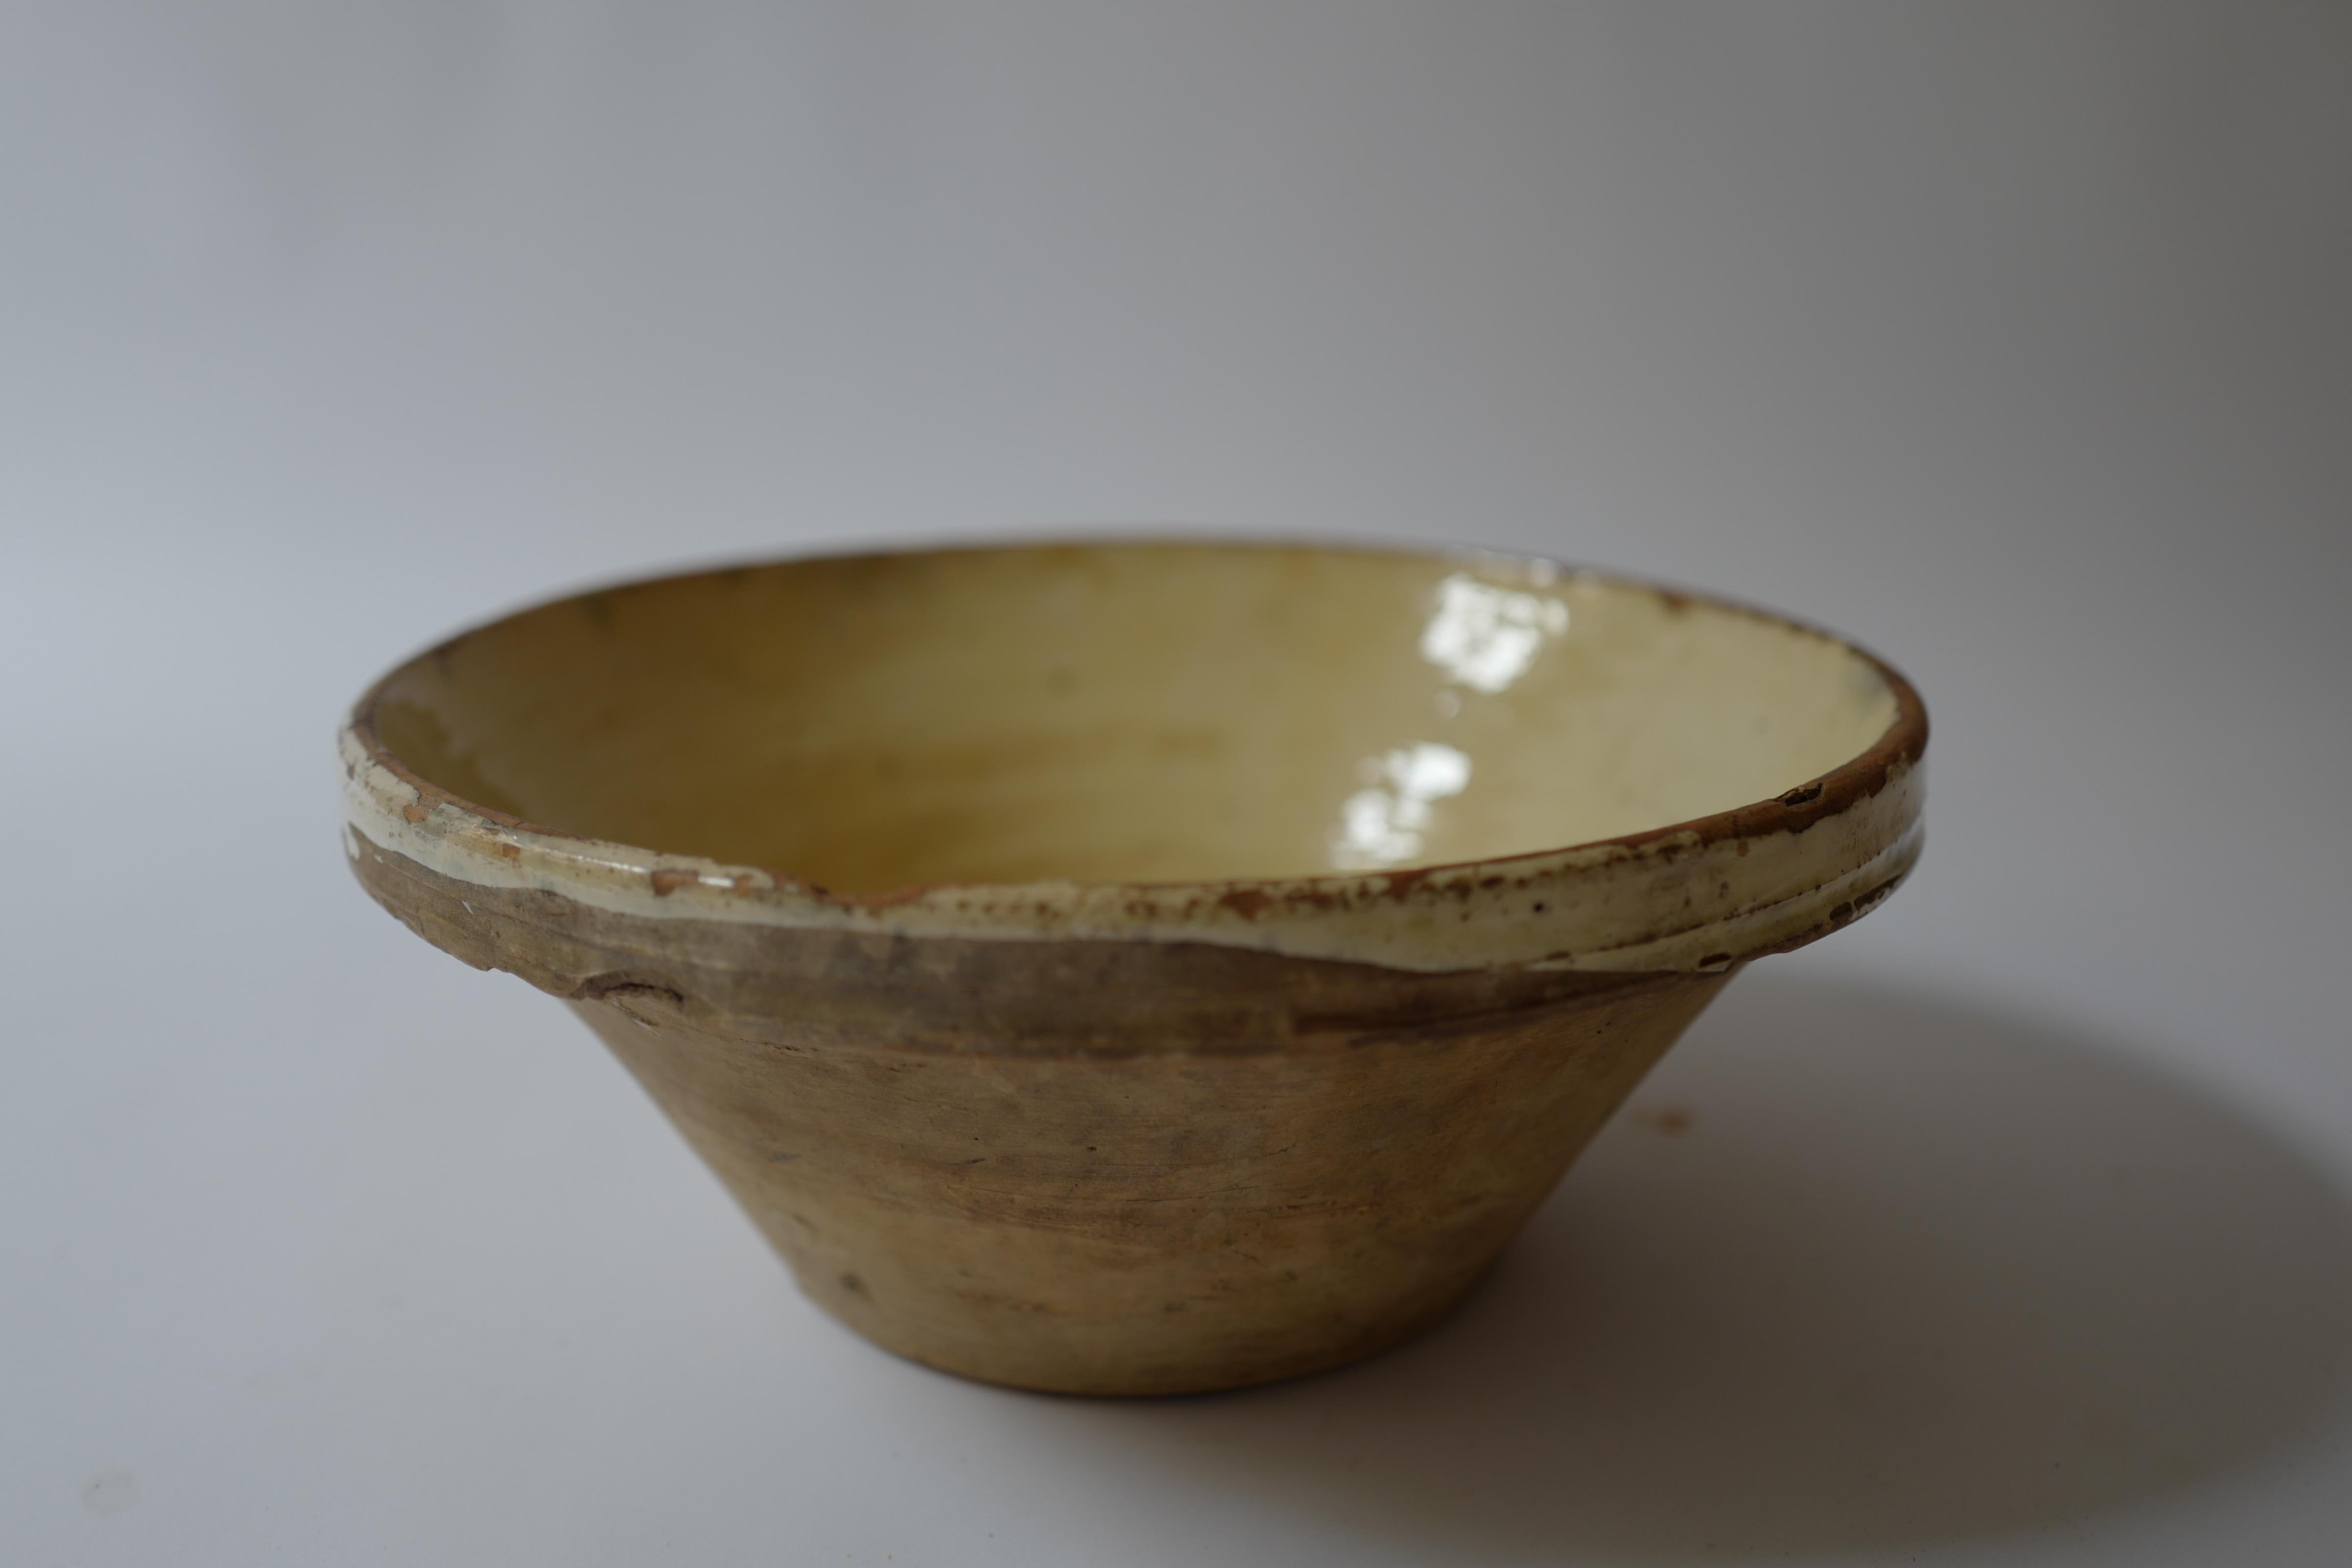 A 19th century French terracotta tian bowl with a lovely yellow glaze. Circa 19th century found in Provence, France. These were used for preparation as mixing bowls made of earthenware. The tian style bowl is originally from Narbonne, France near